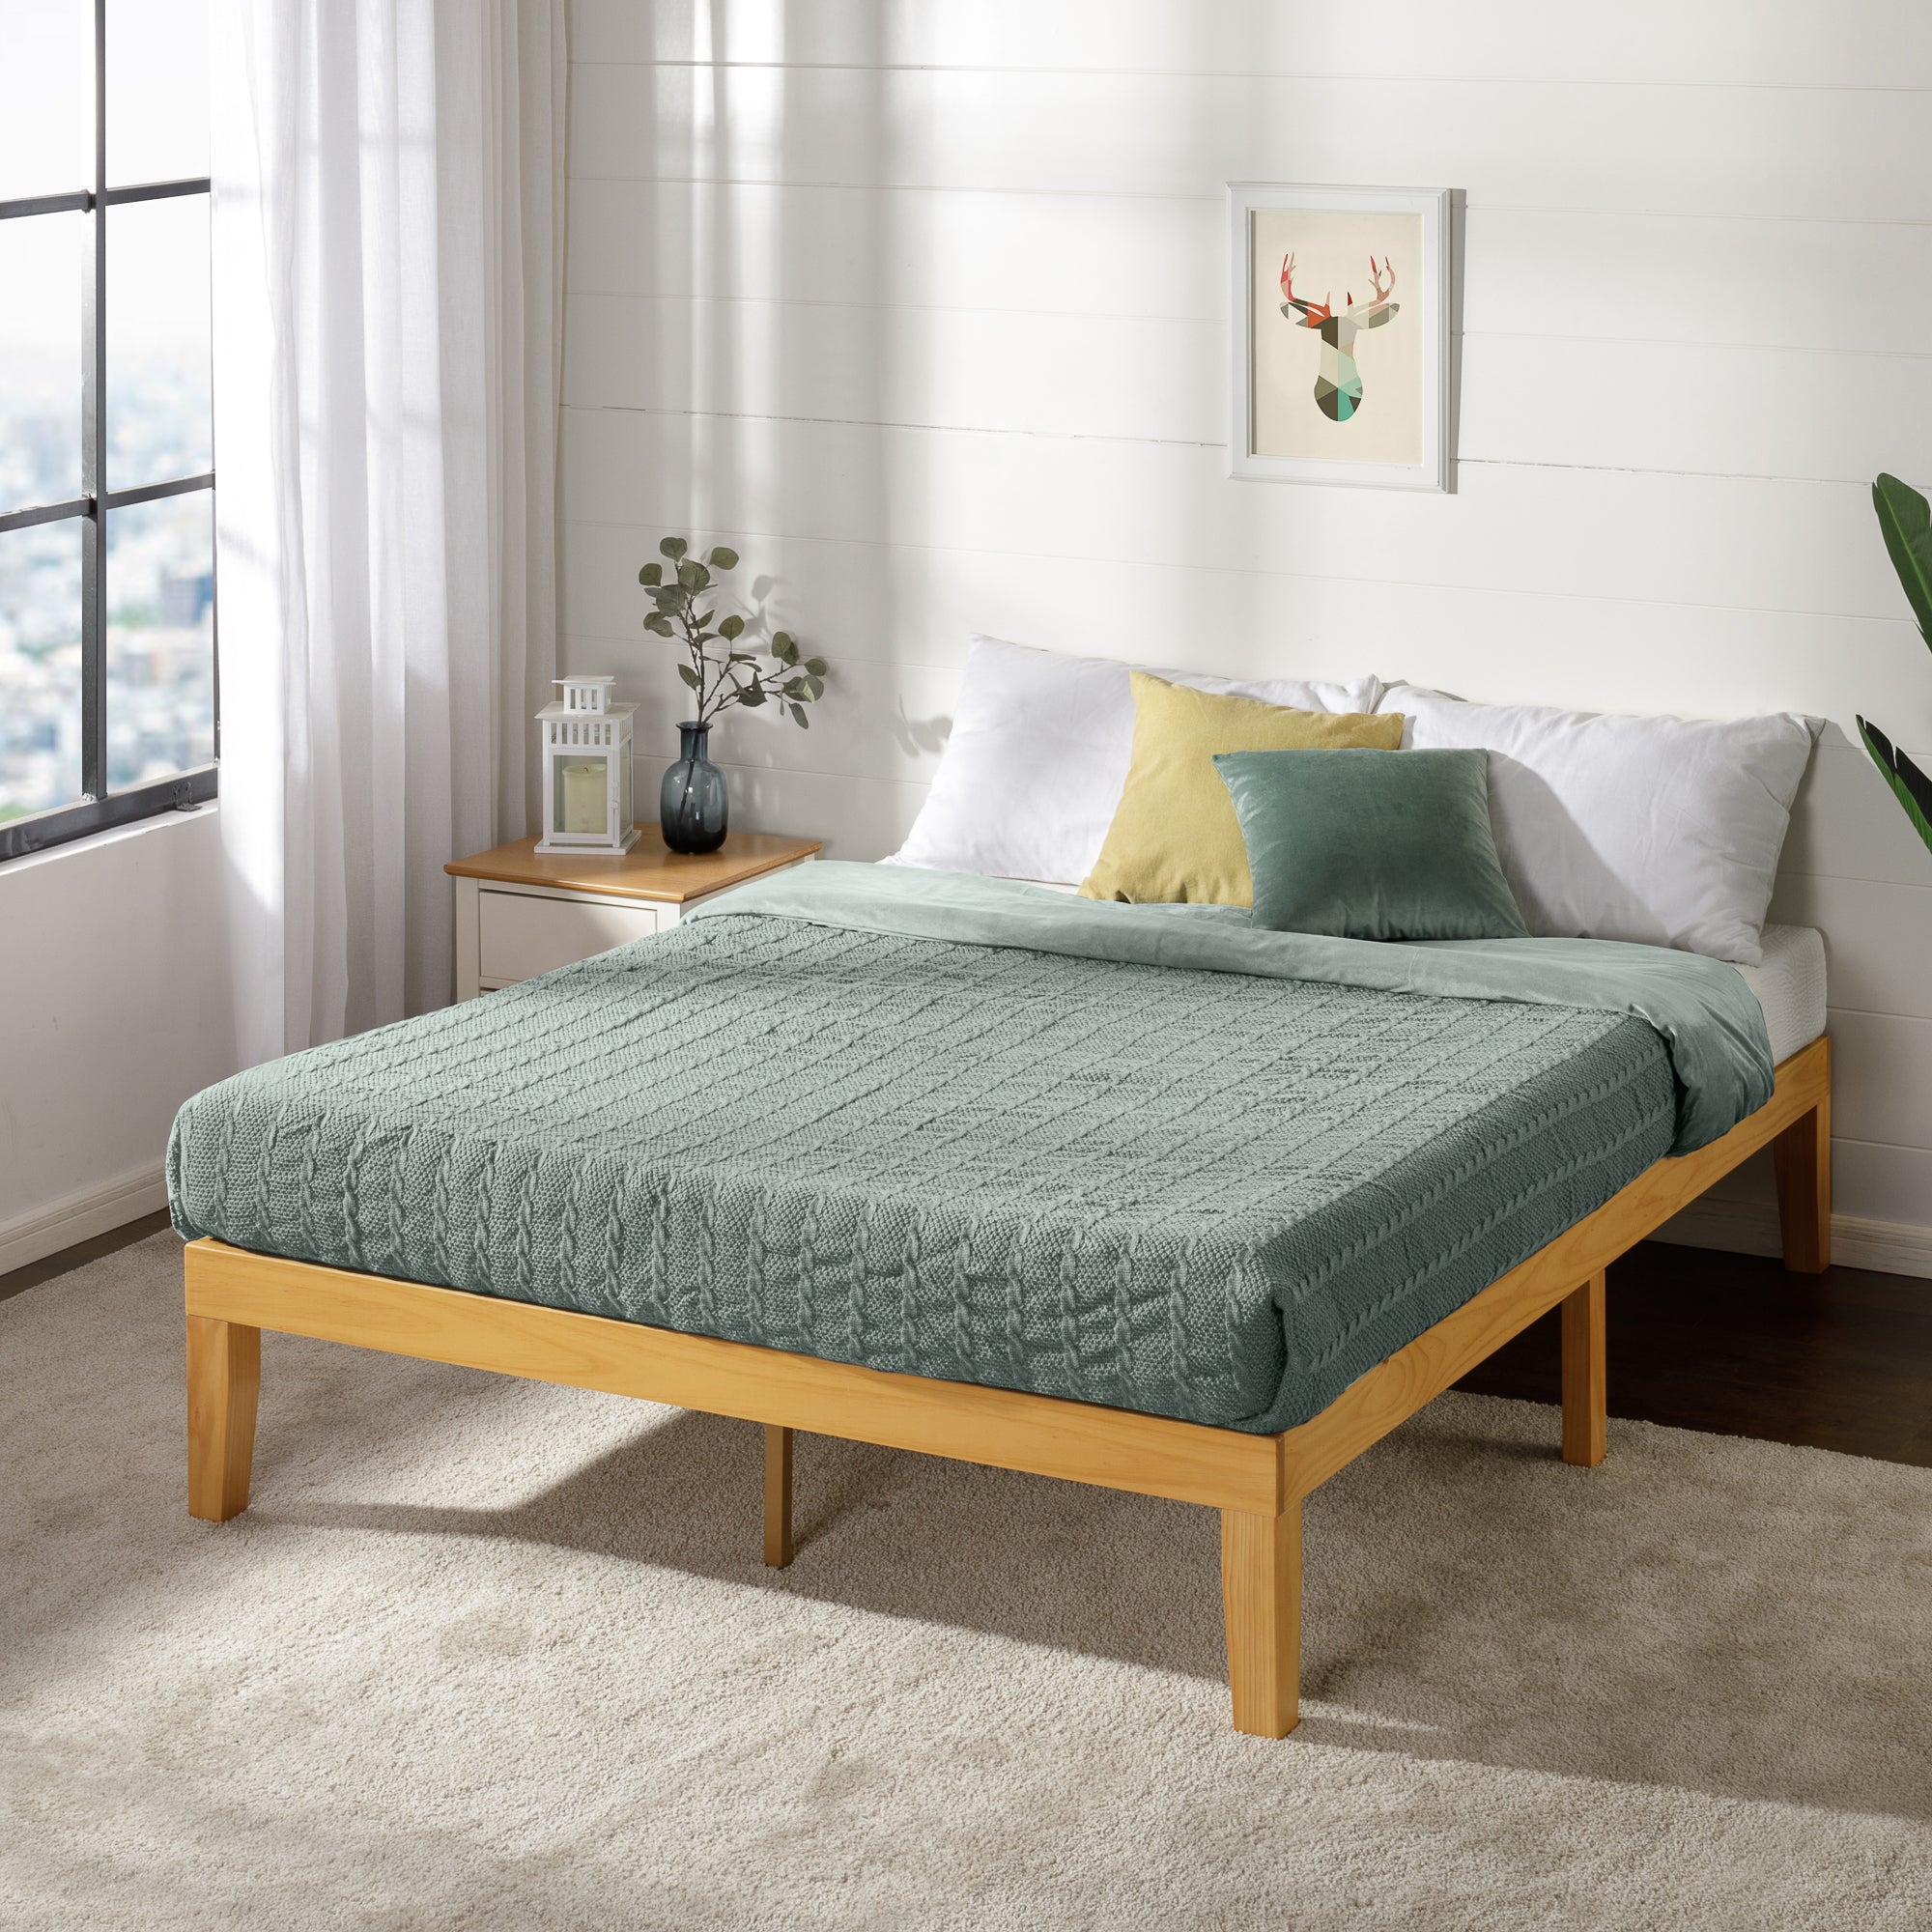 Zinus Moiz 35cm Wood Bed Frame Base Natural - Double King Queen Size